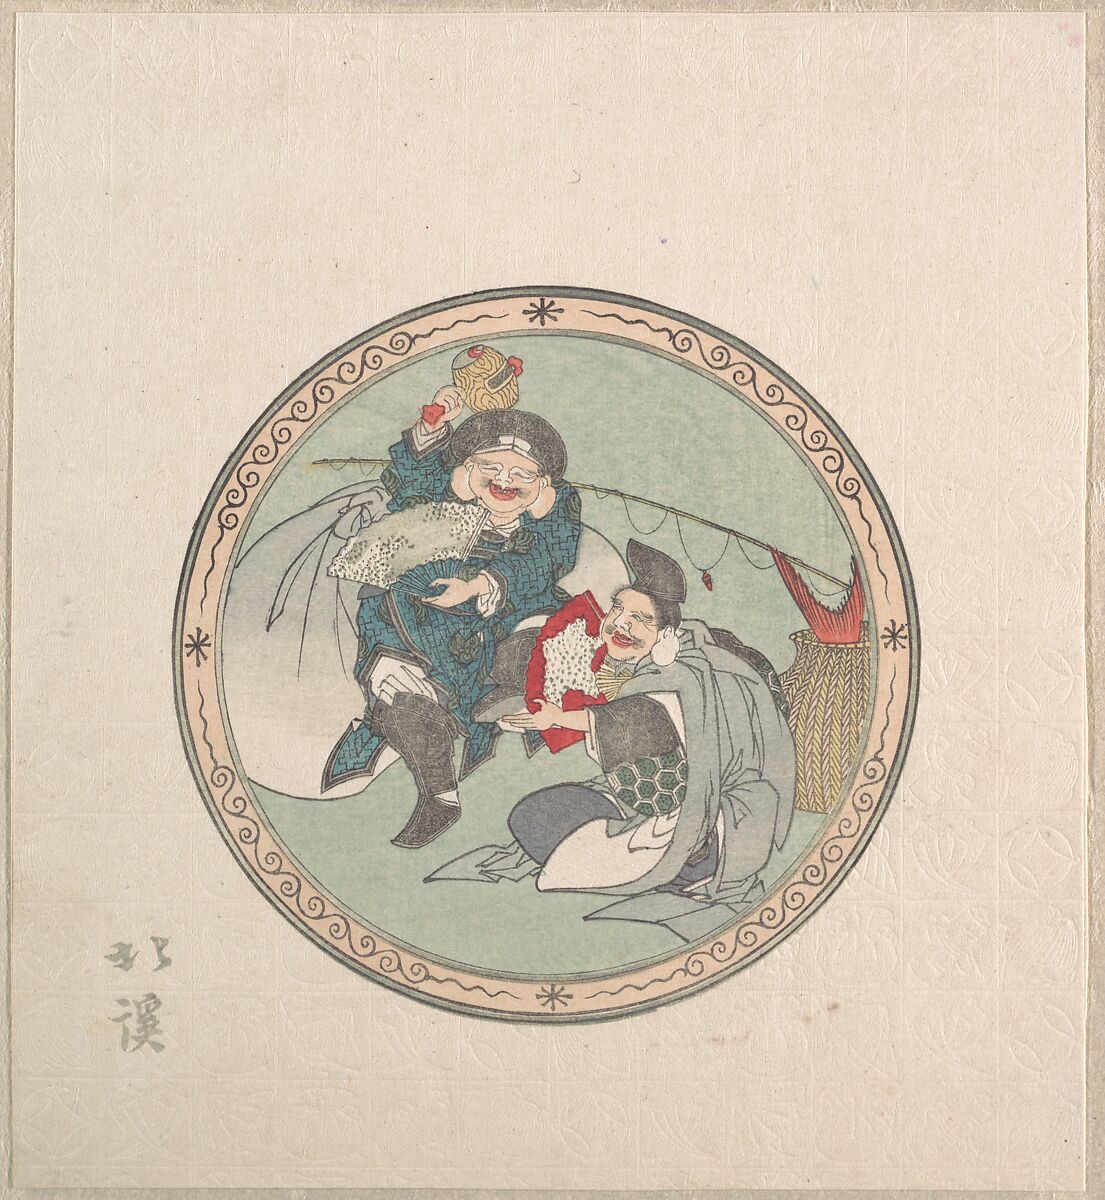 Ebisu and Daikoku; Two of the Seven Gods of Good Fortune, Totoya Hokkei (Japanese, 1780–1850), Part of an album of woodblock prints (surimono); ink and color on paper, Japan 